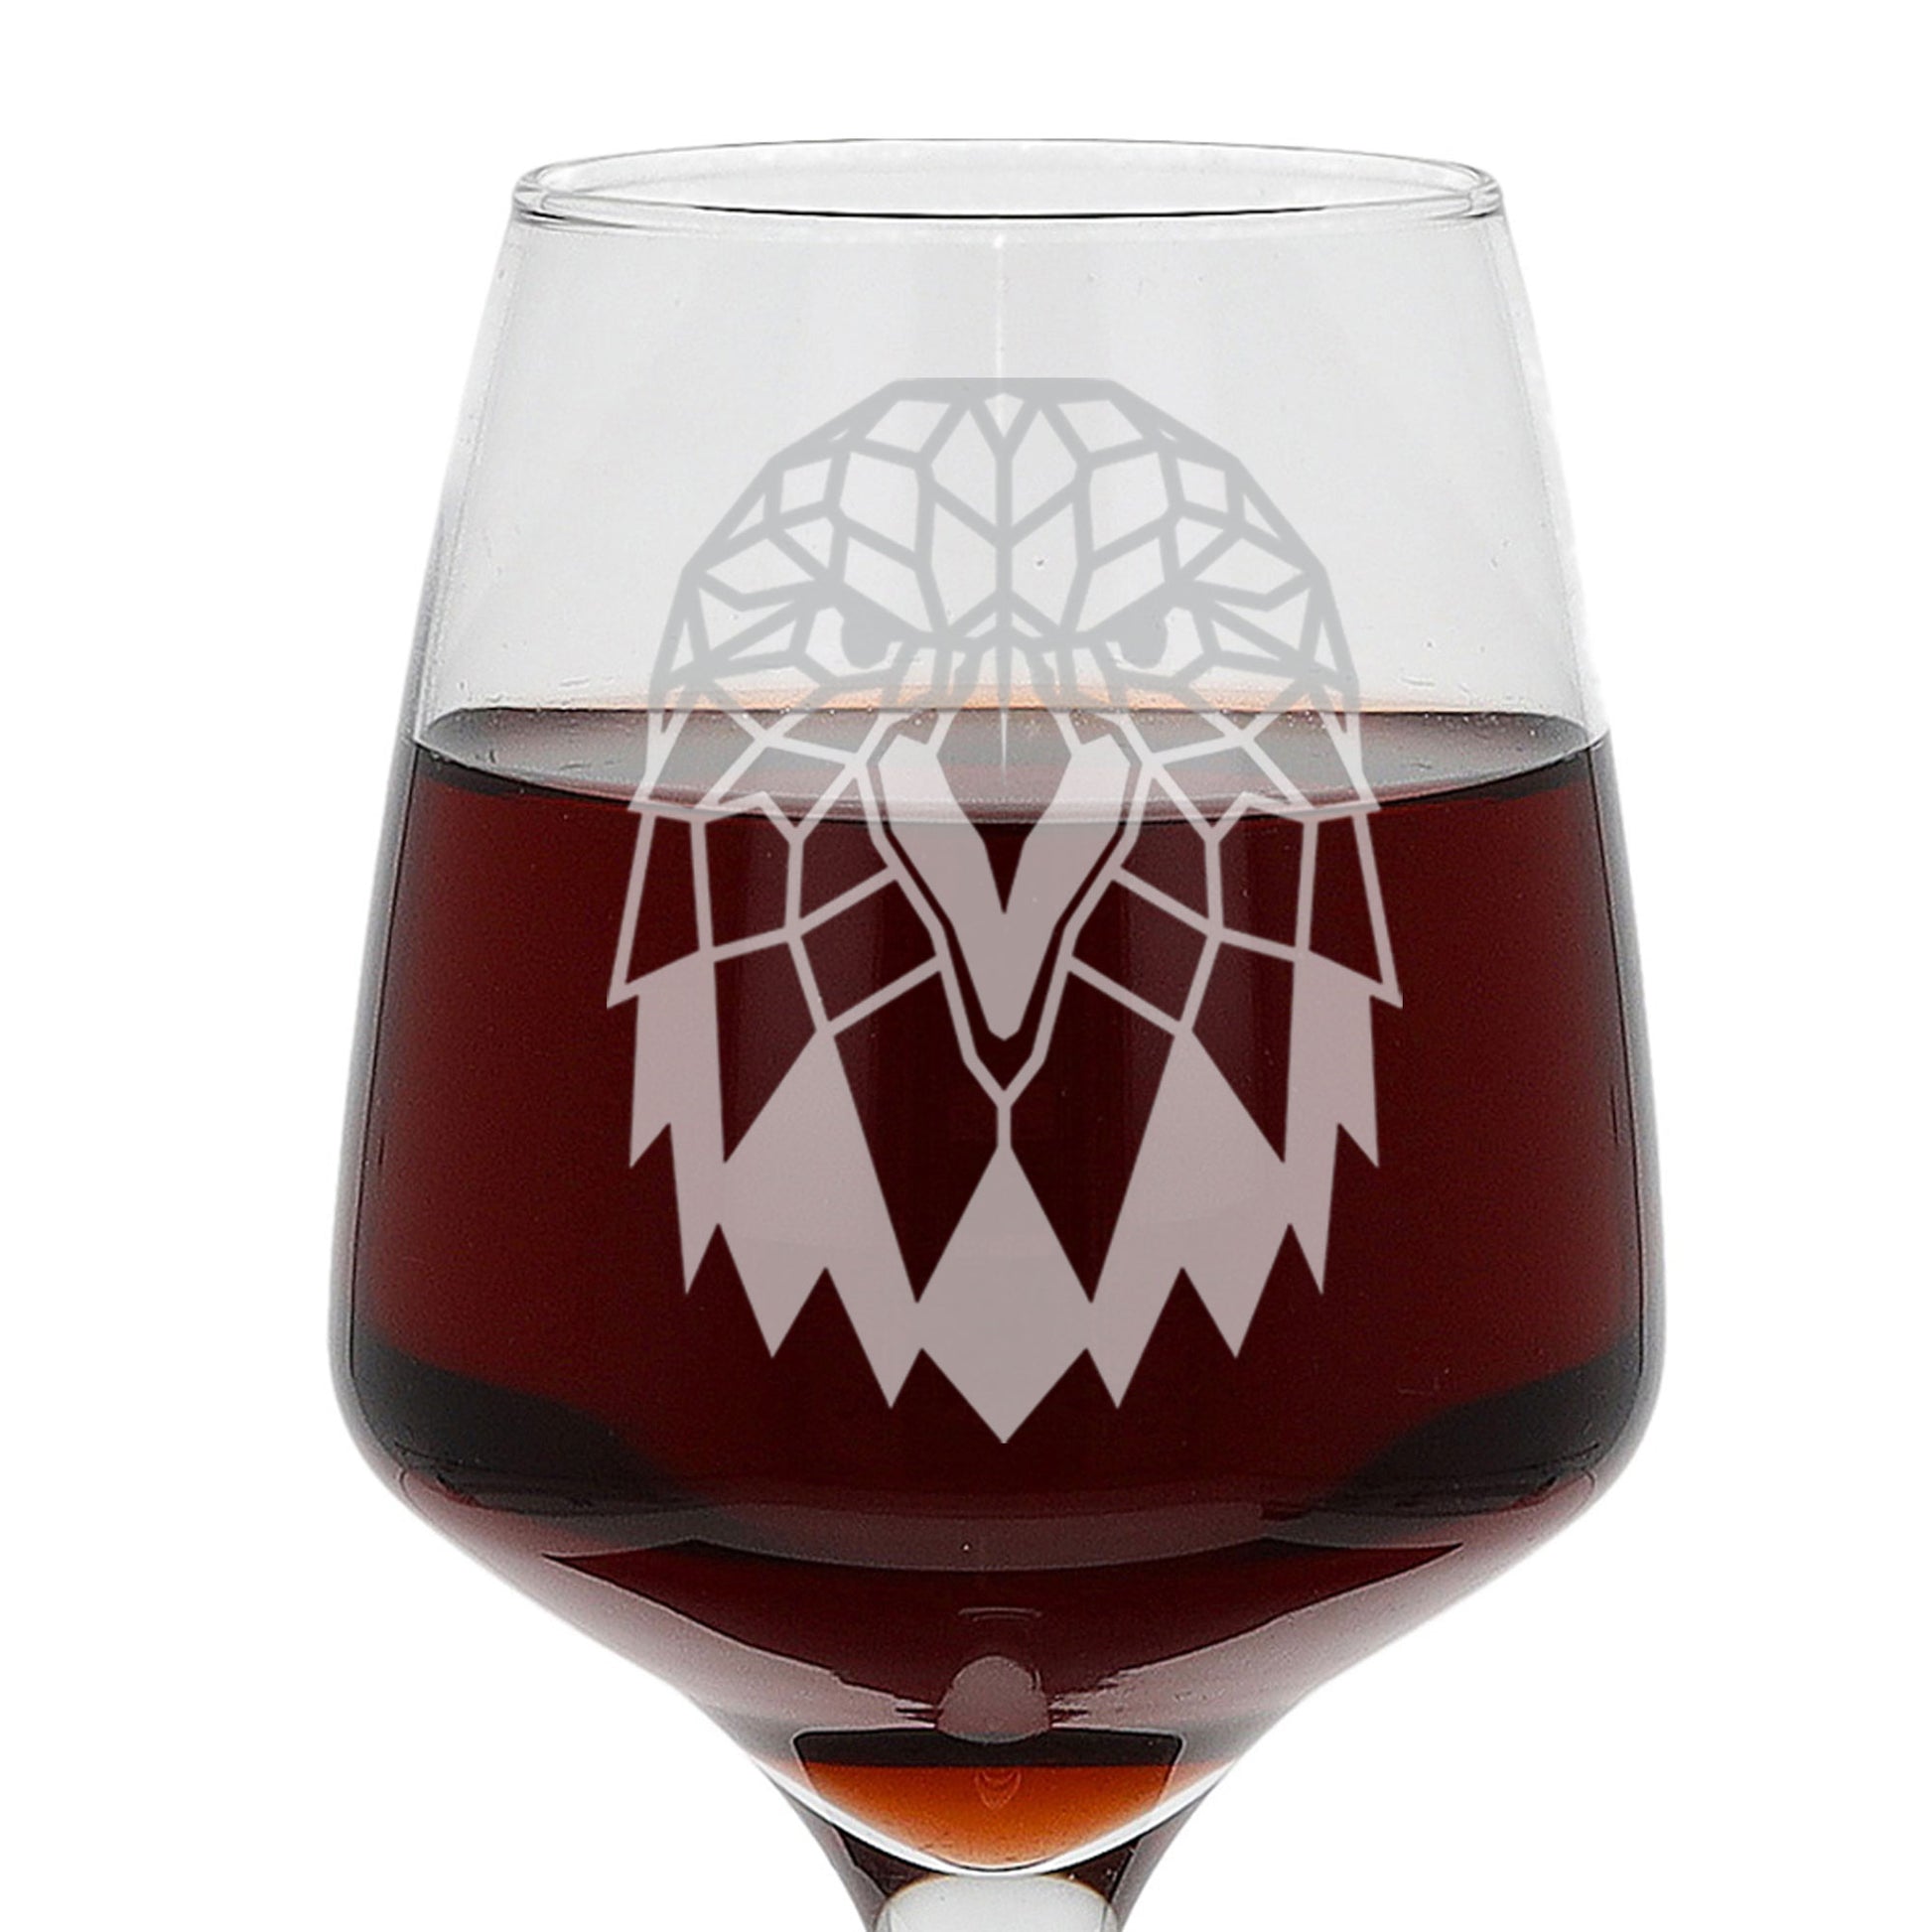 Eagle Engraved Wine Glass  - Always Looking Good -   